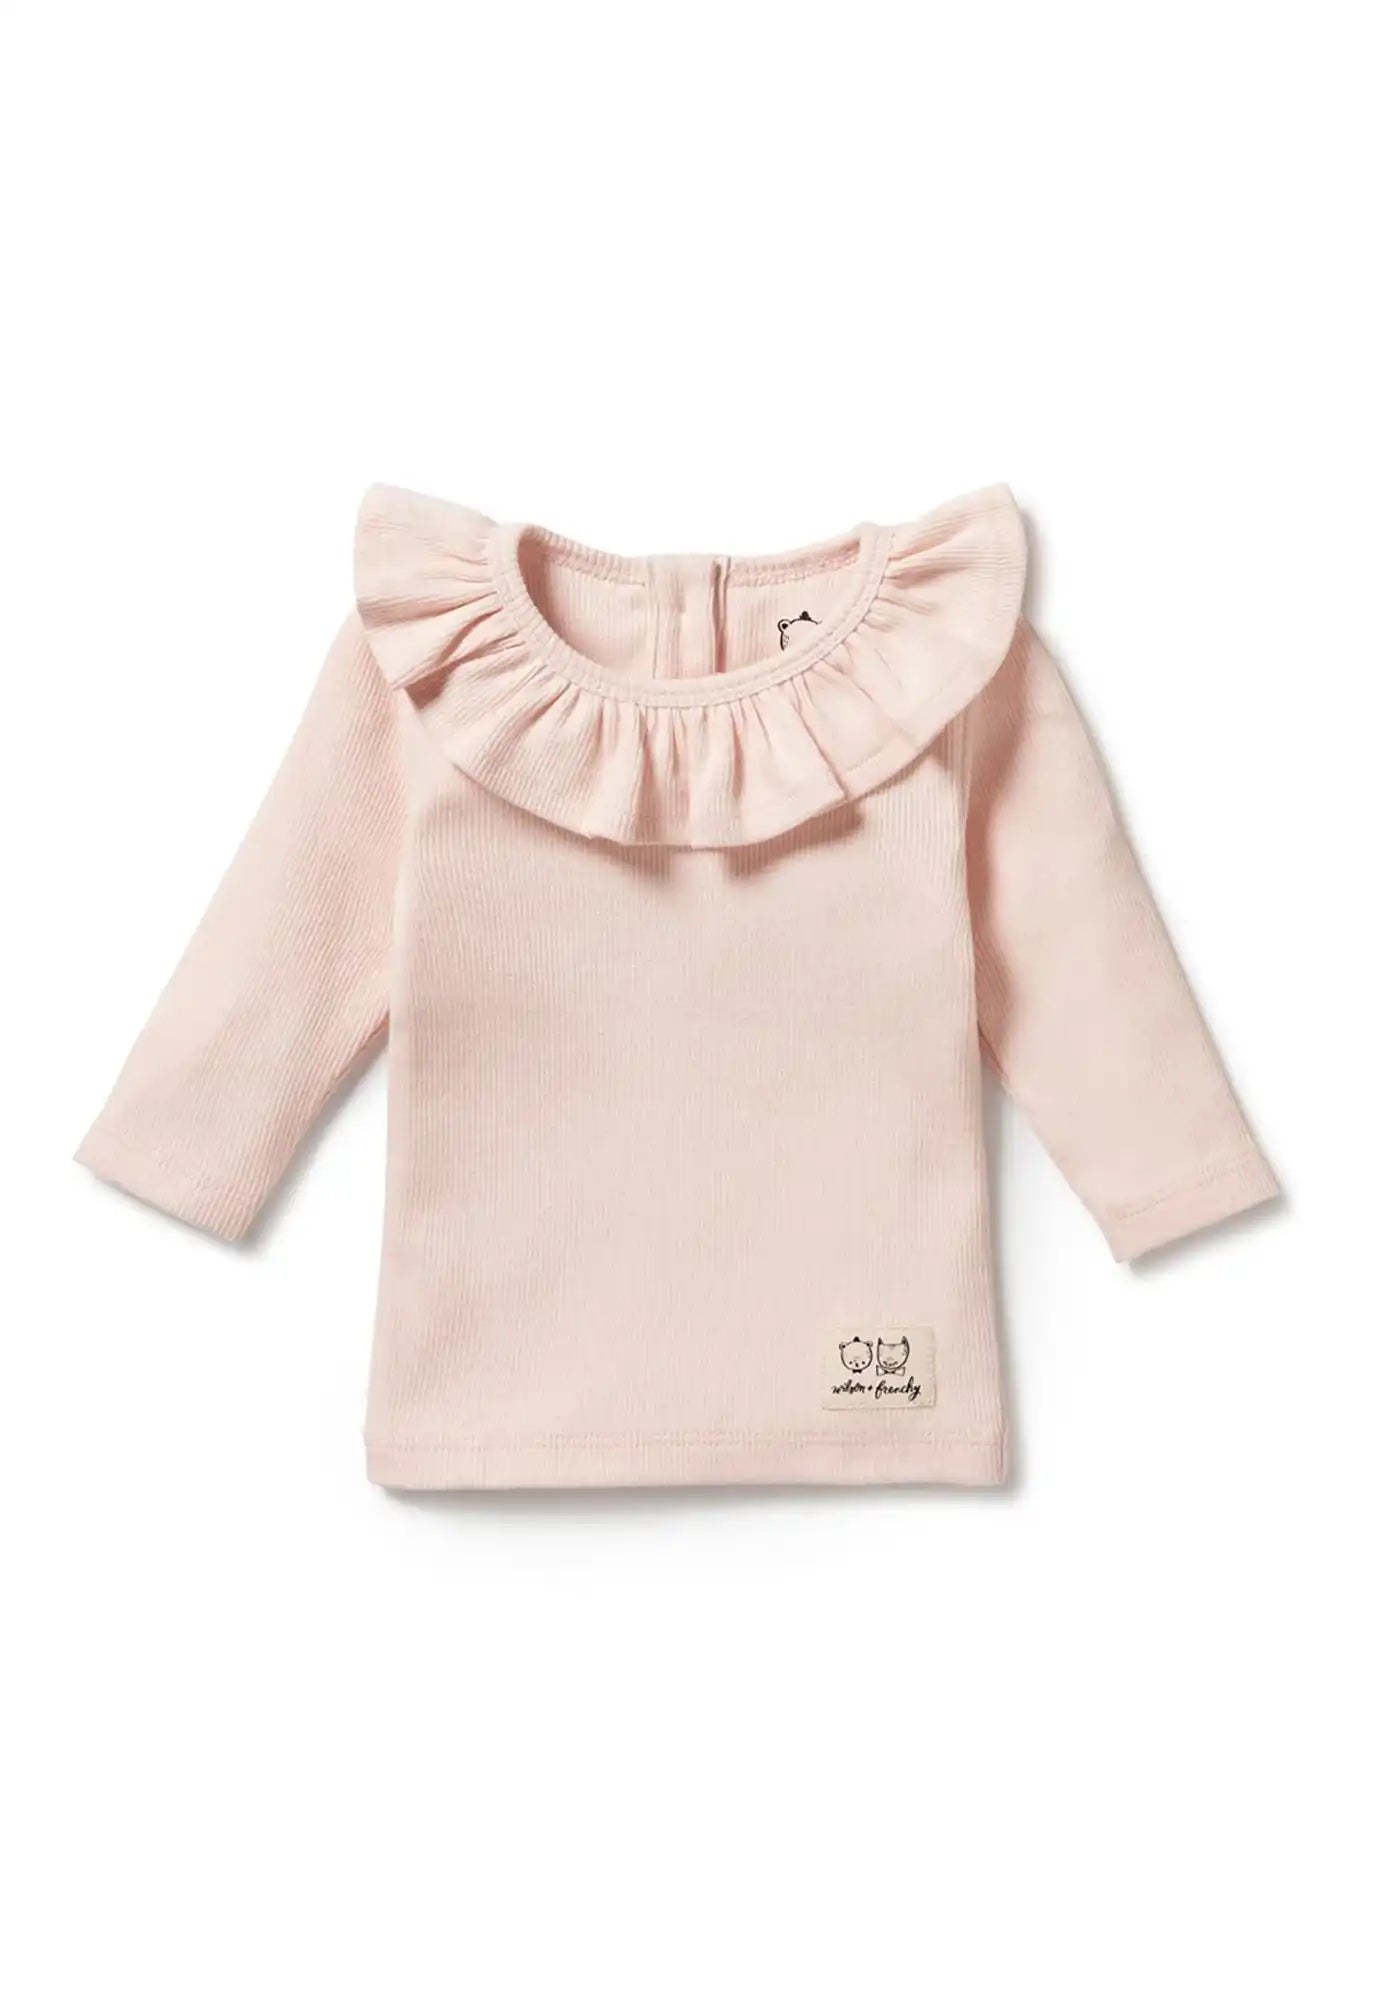 wilson & frenchy - ruffle top - pink